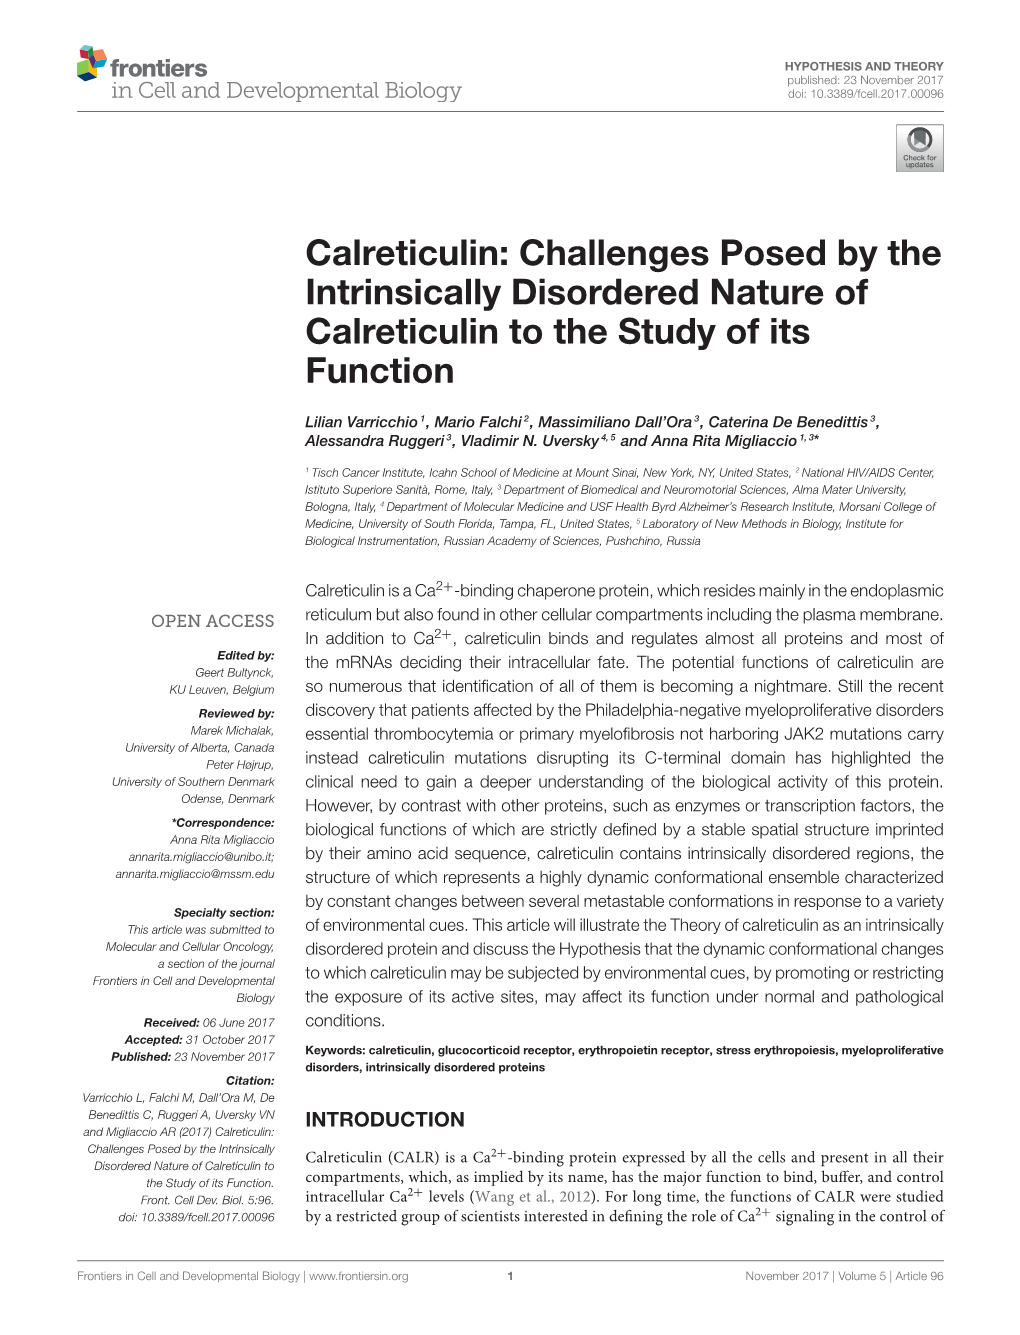 Calreticulin: Challenges Posed by the Intrinsically Disordered Nature of Calreticulin to the Study of Its Function